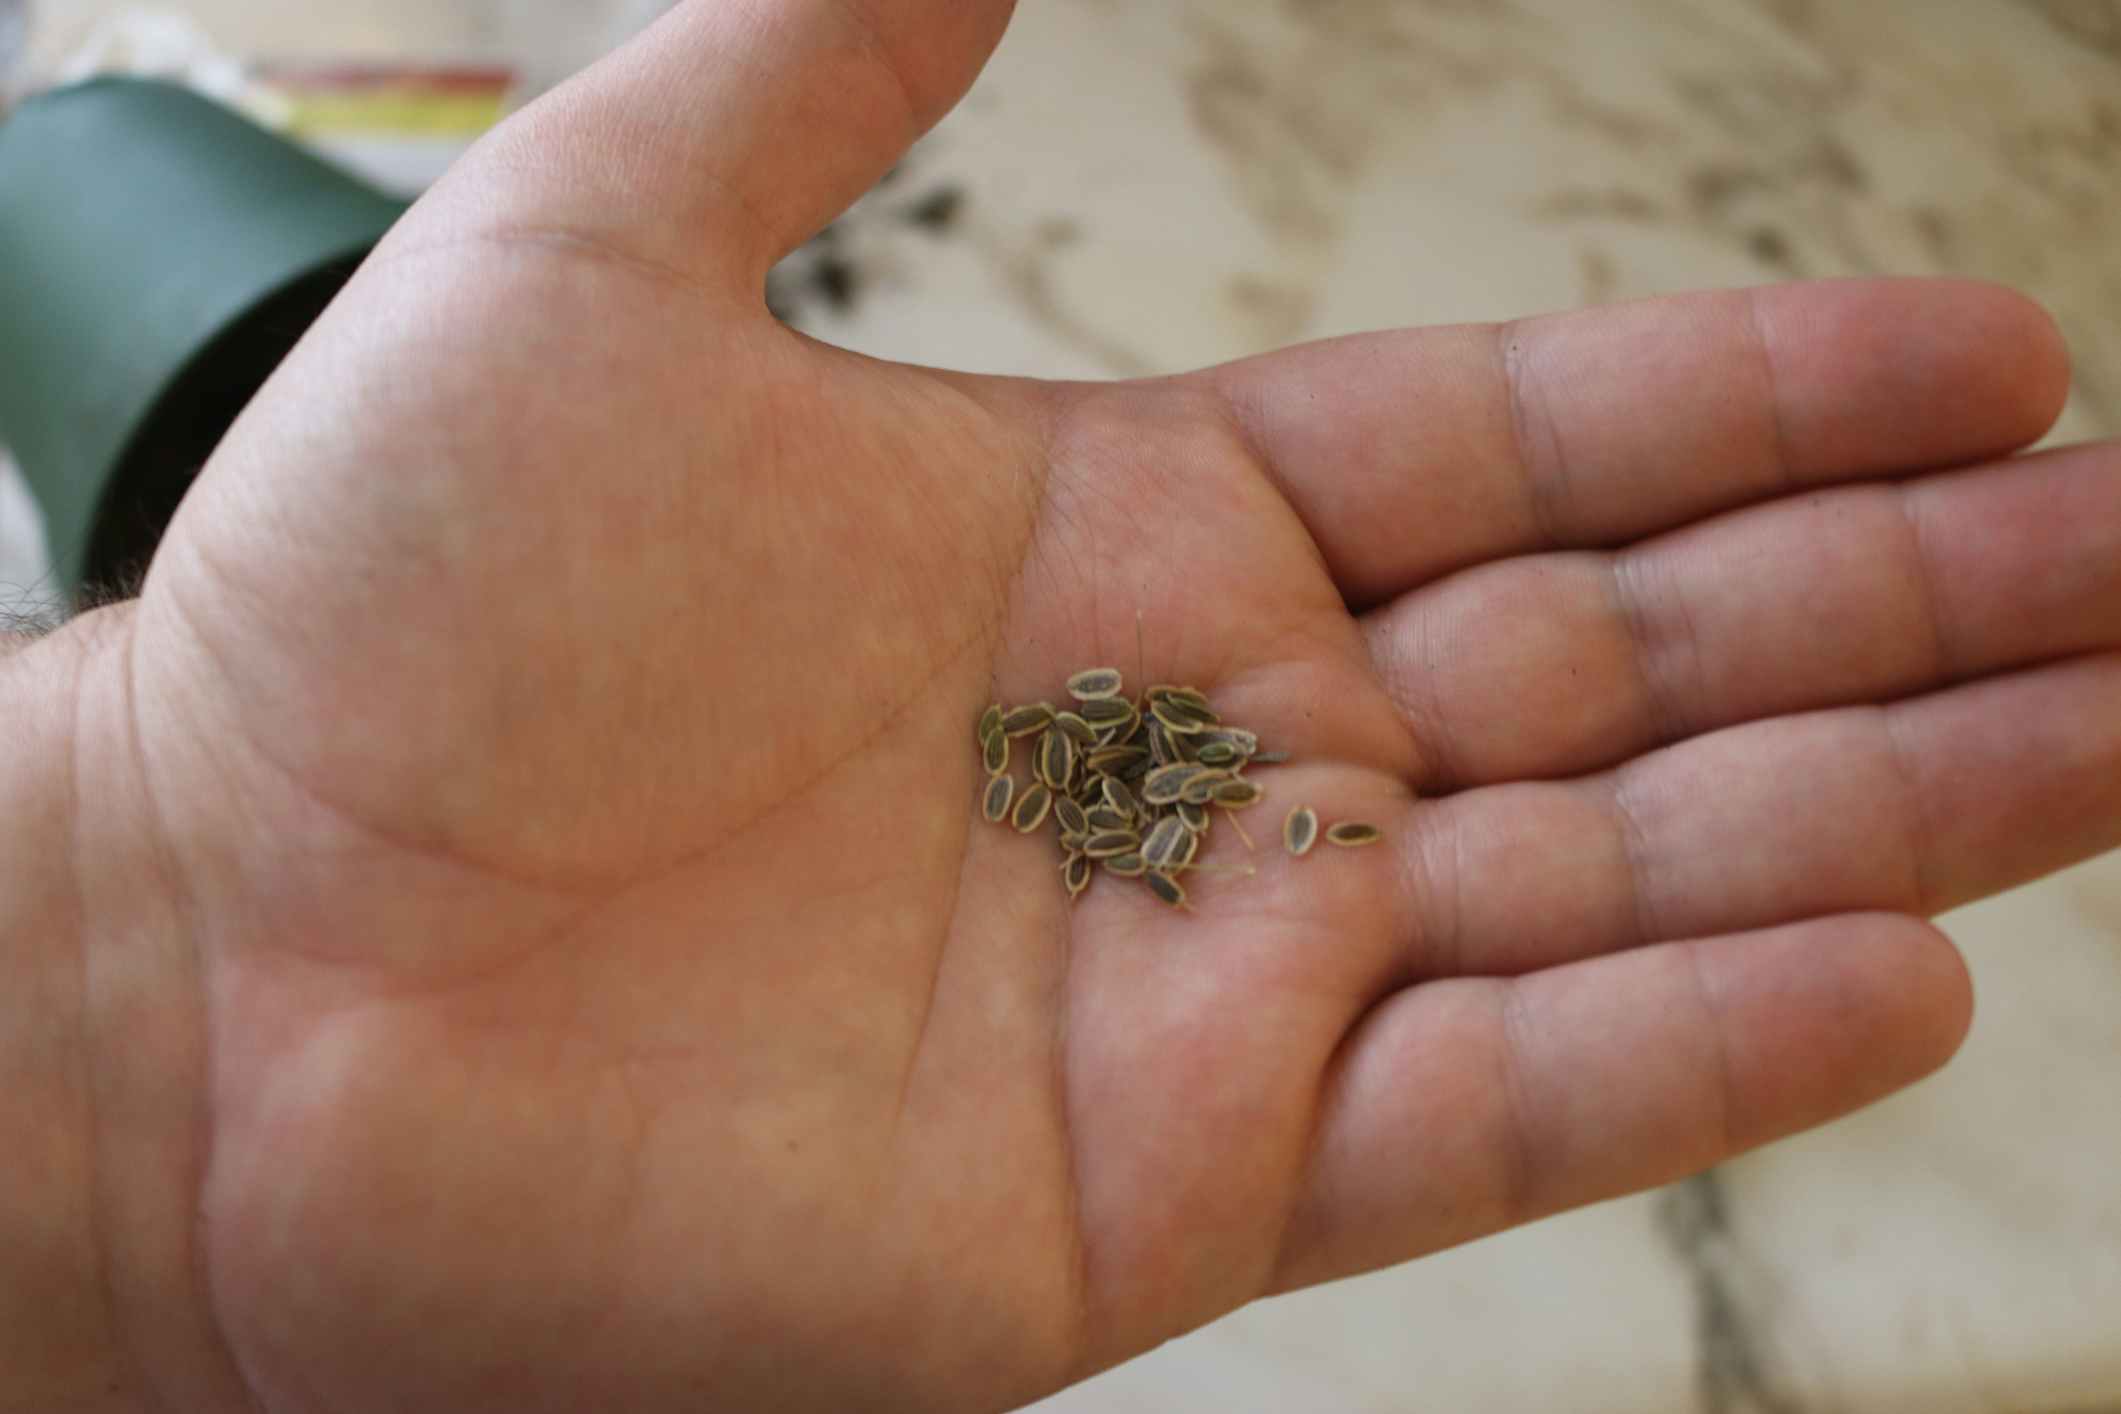 A person's hand holding up a pile of small seeds.